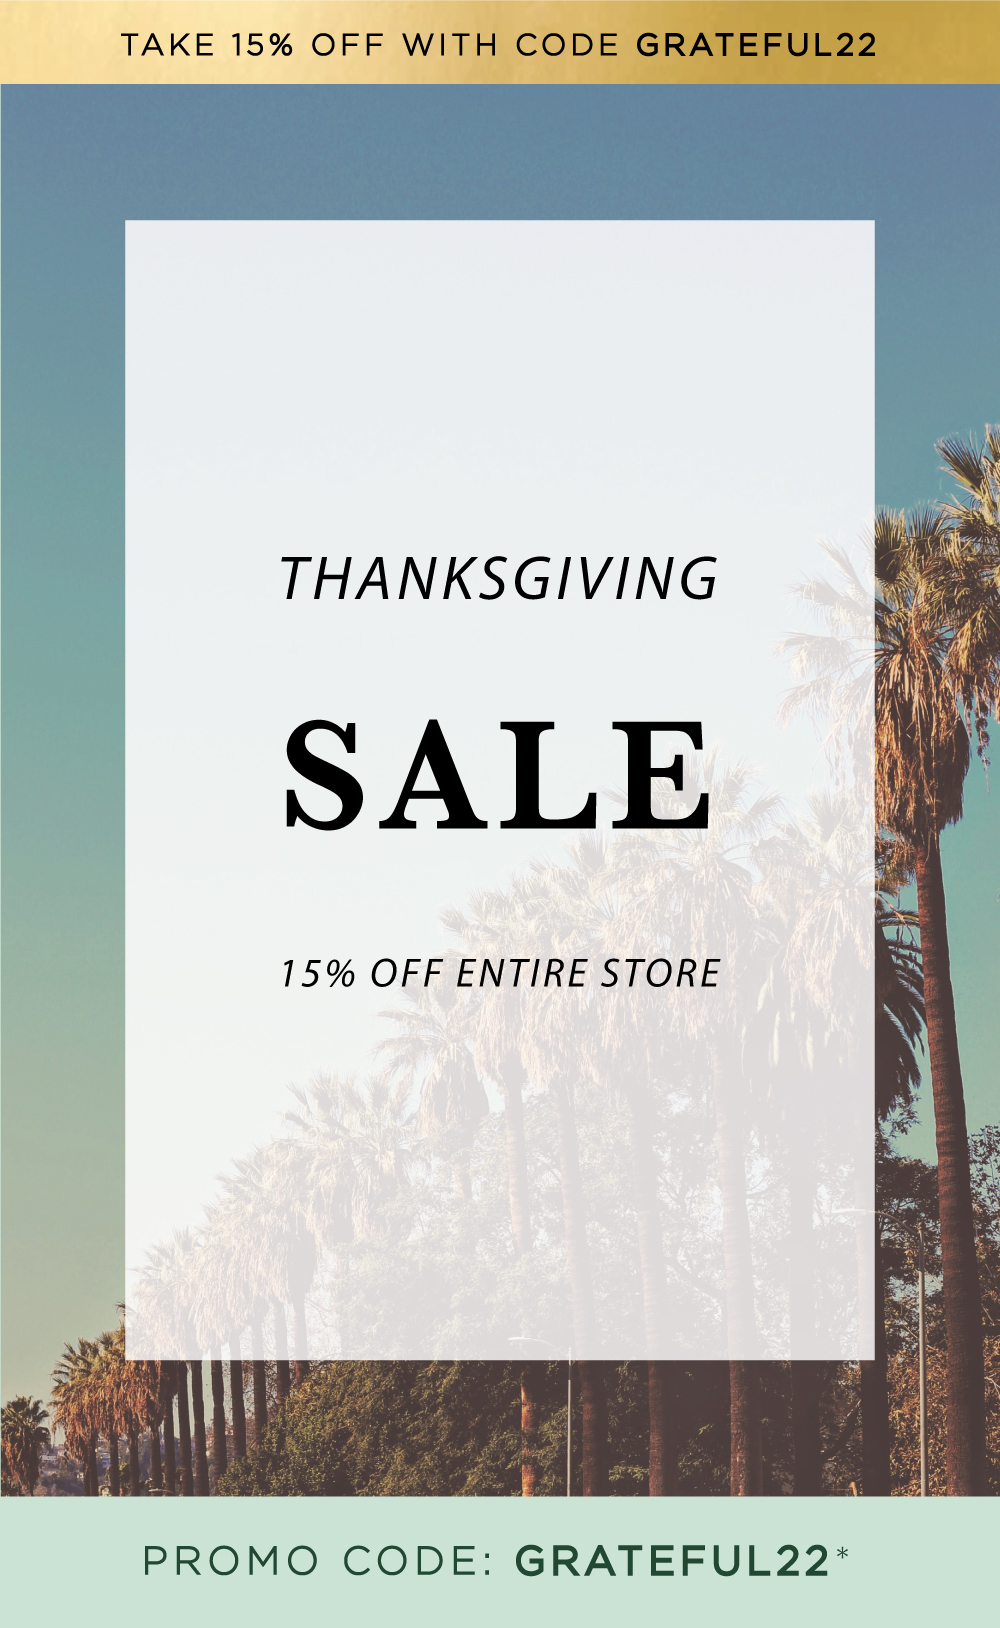  THANKSGIVING SALE 15% OFF ENTIRE STORE PROMO CODE: GRATEFUL22* 